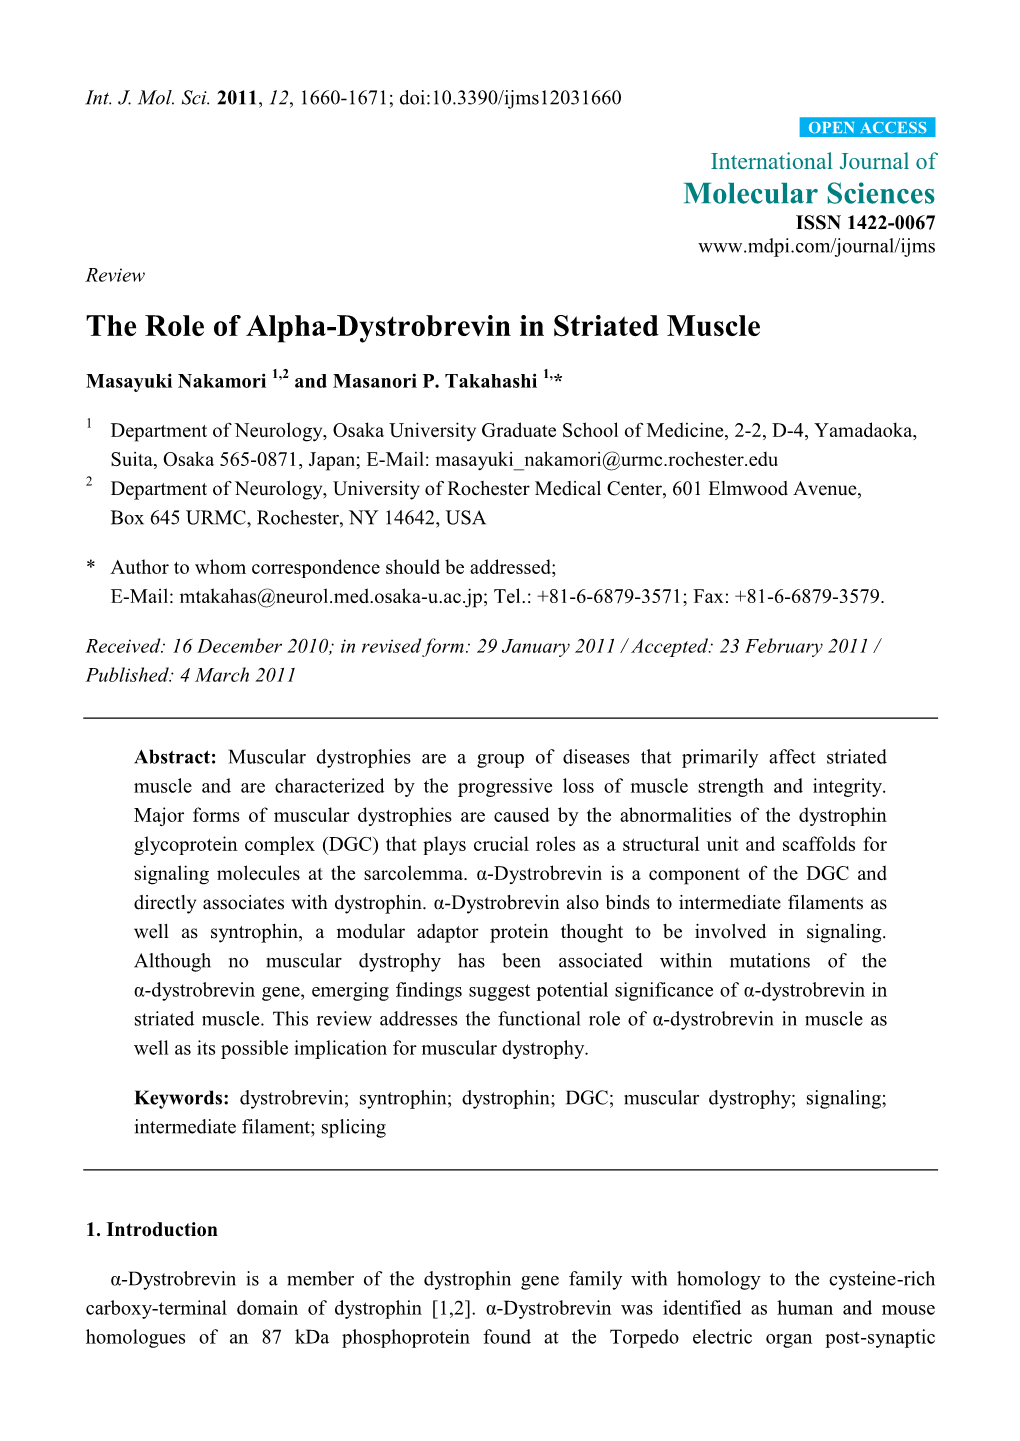 The Role of Alpha-Dystrobrevin in Striated Muscle